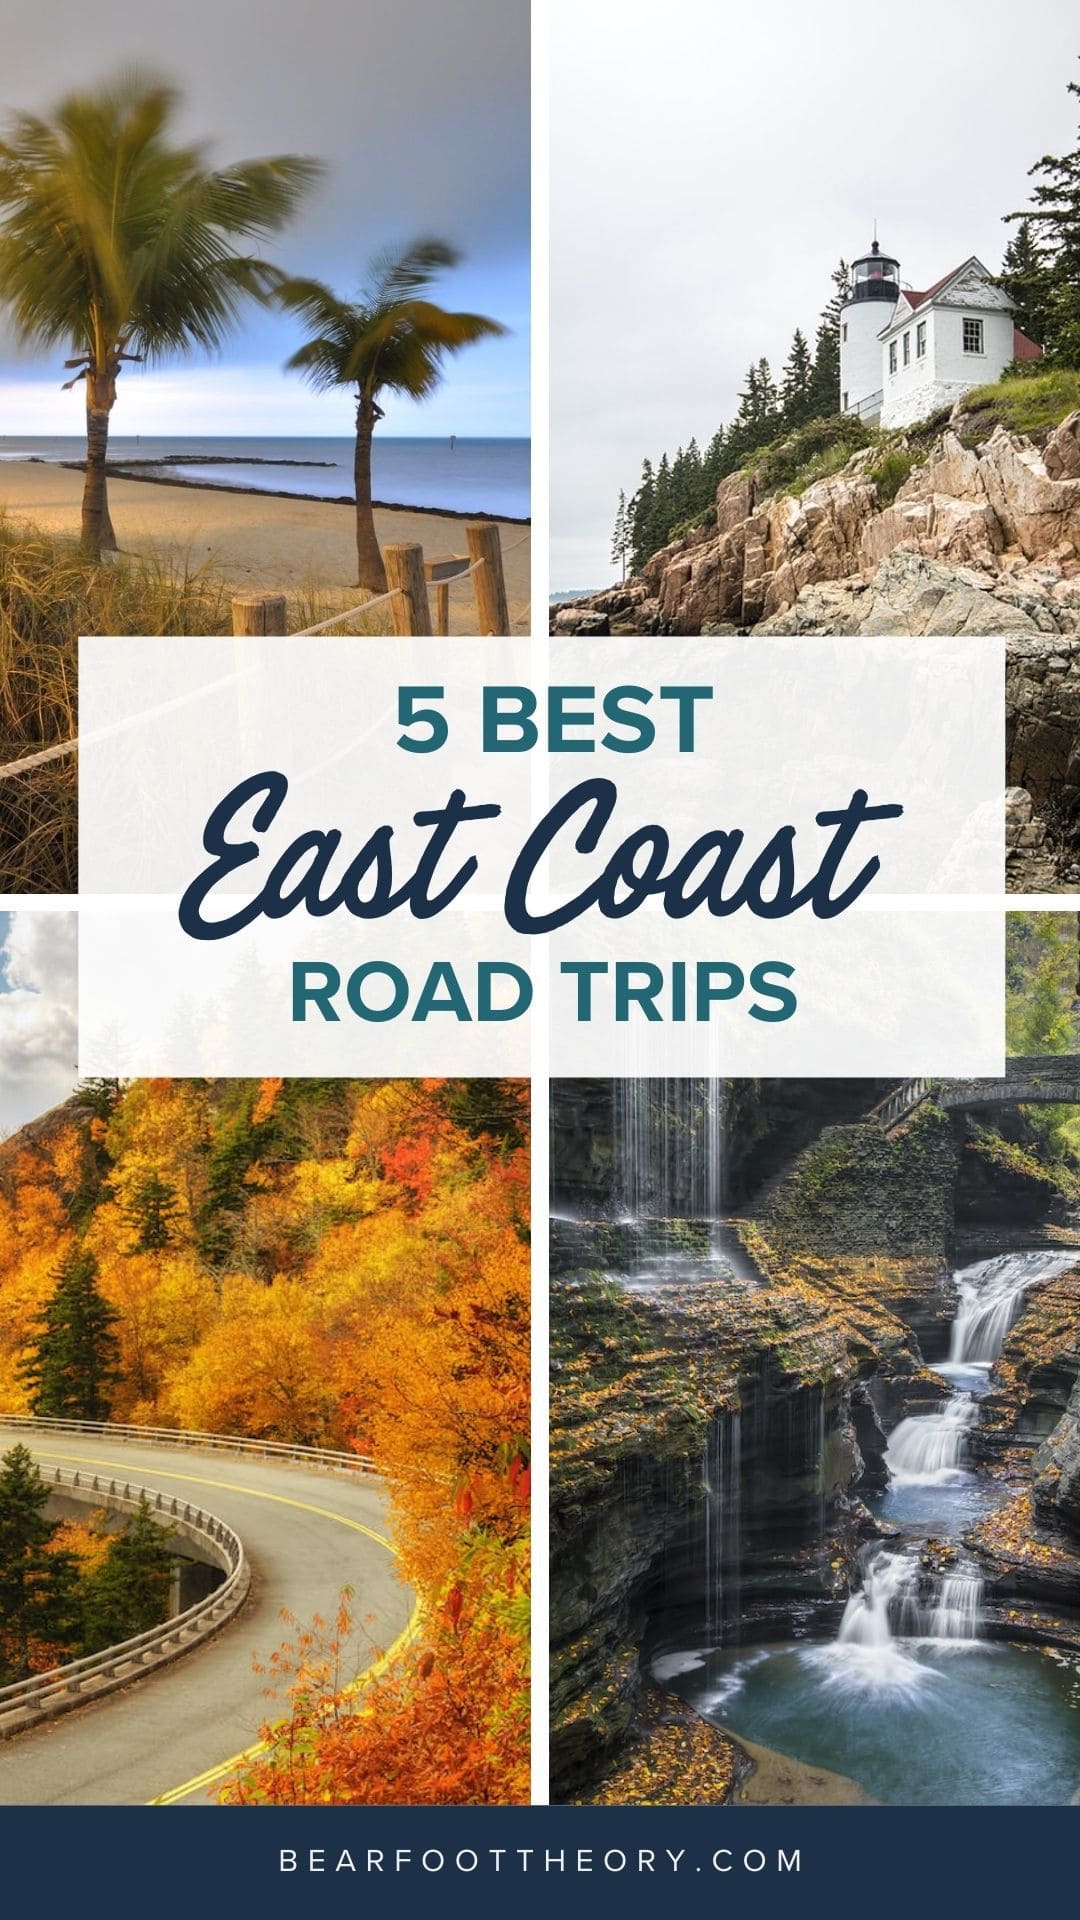 Explore the best of the East Coast with these 5 adventurous road trips from Maine to North Carolina to the Florida coast and more.